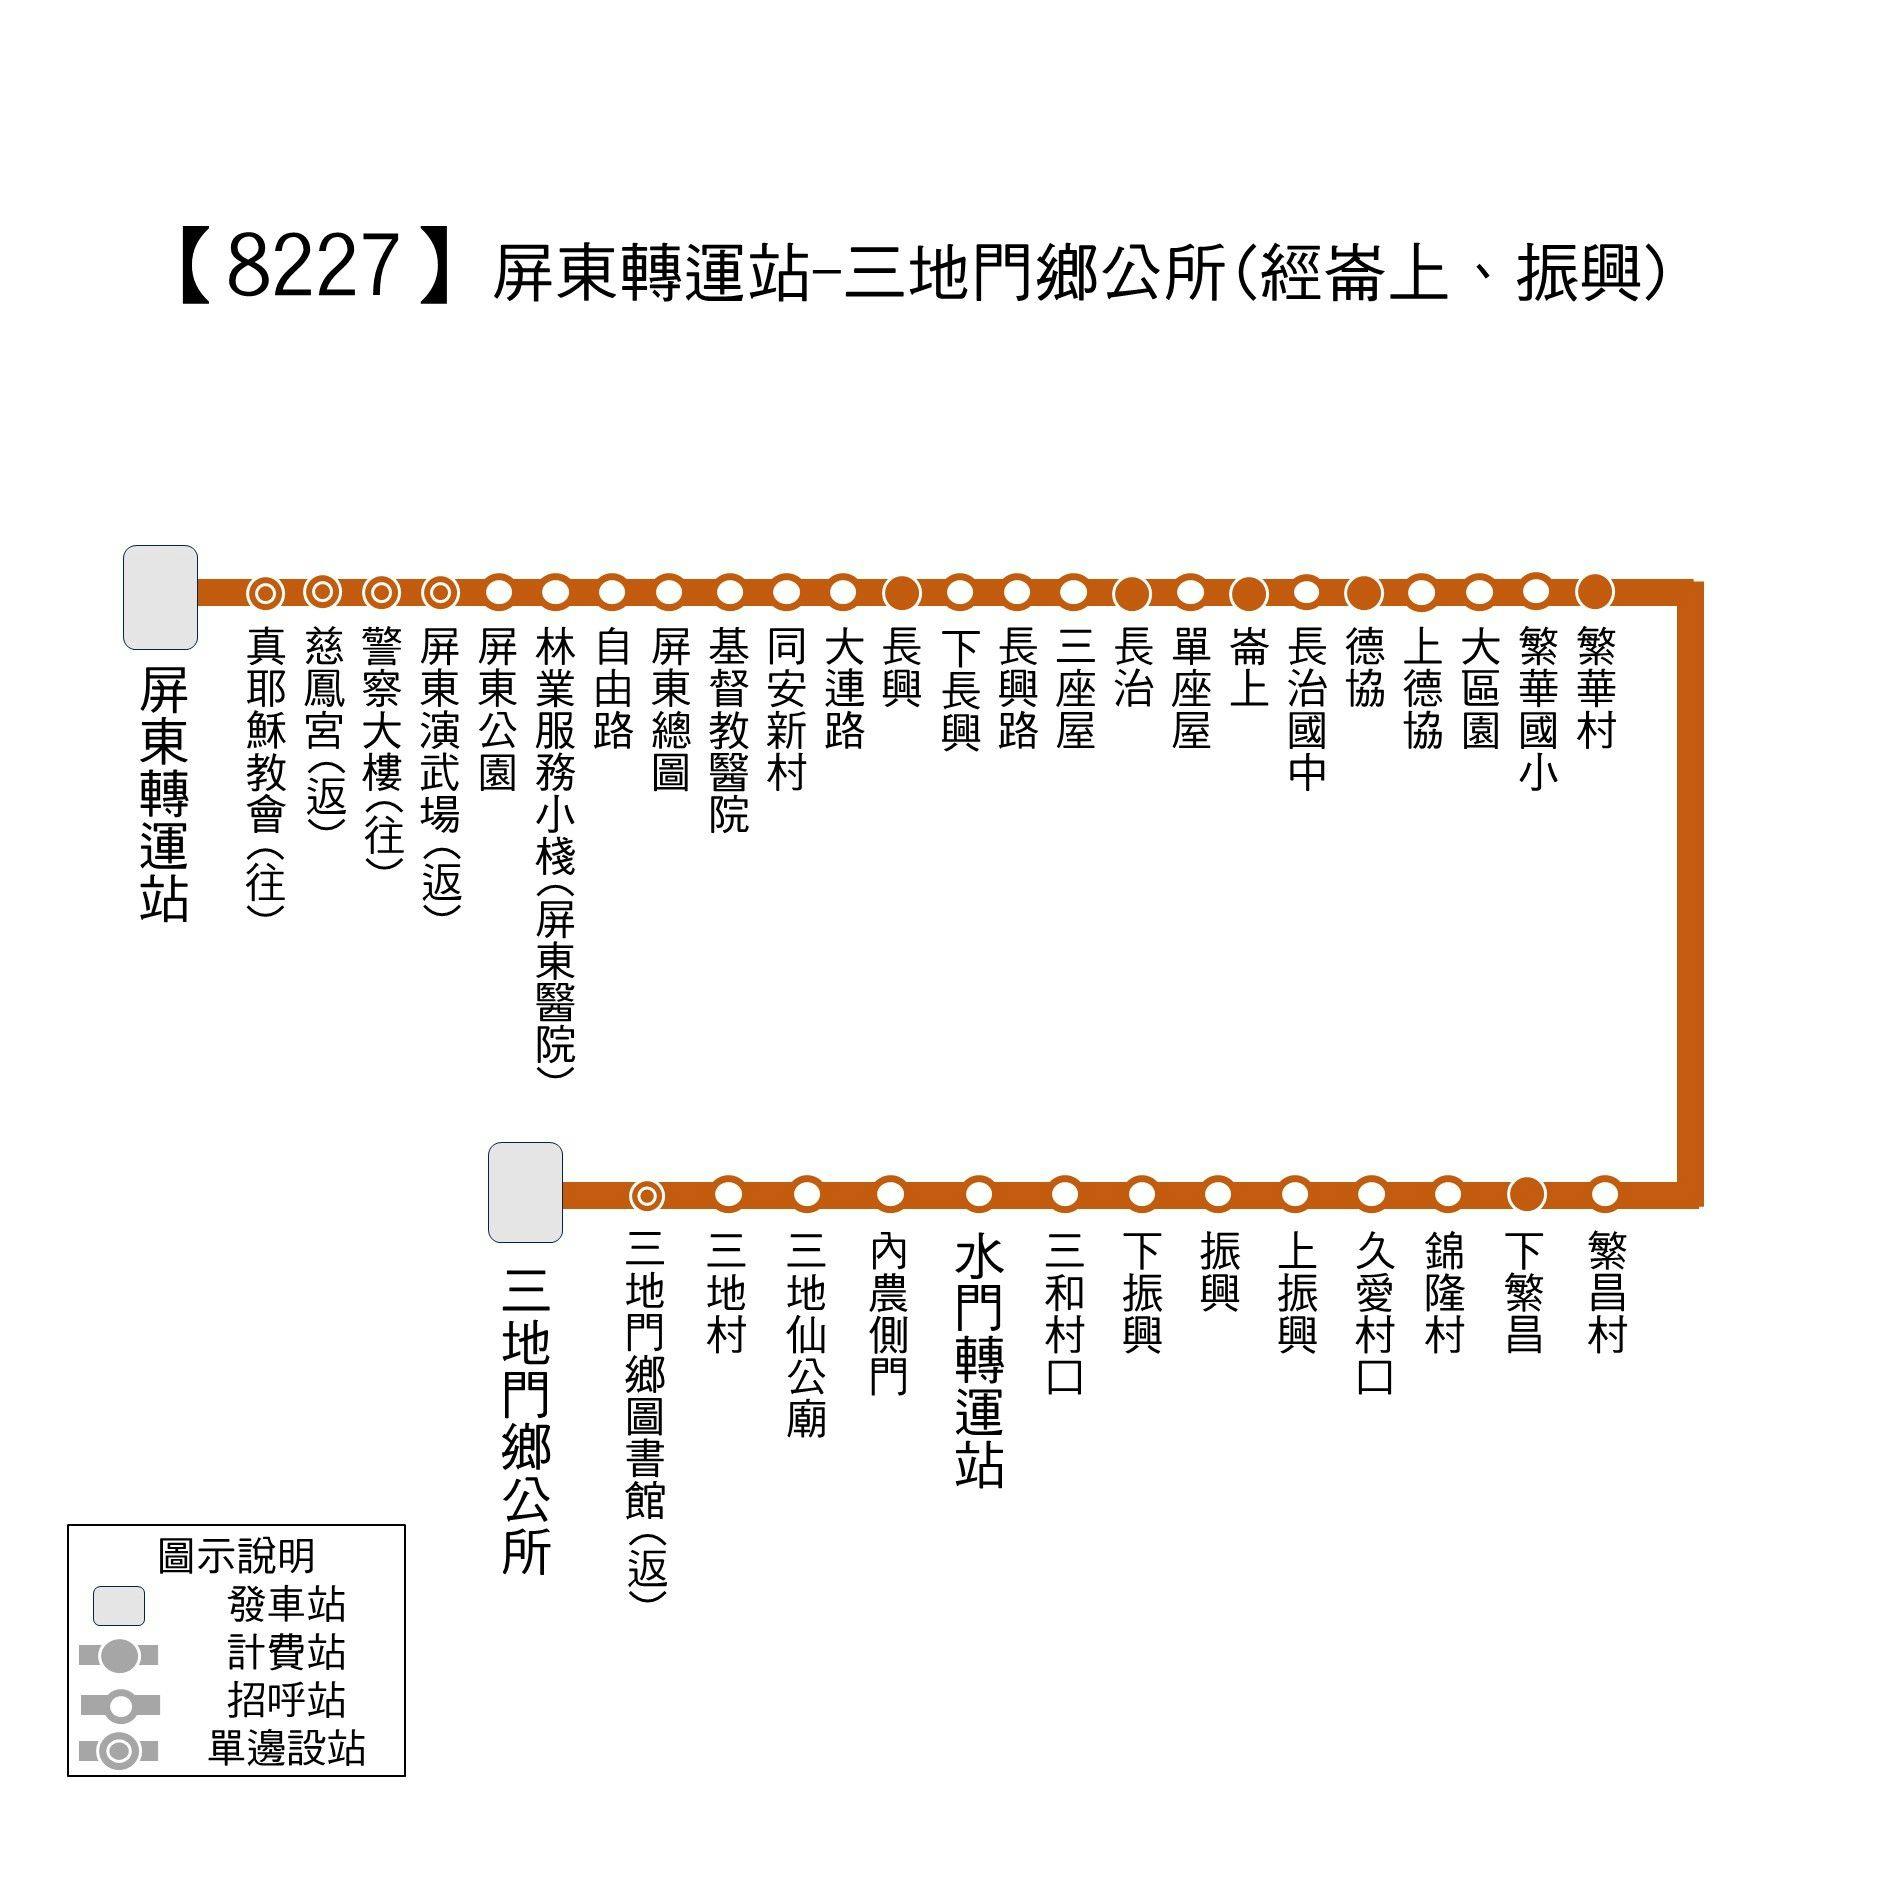 8227Route Map-Pingtung Bus